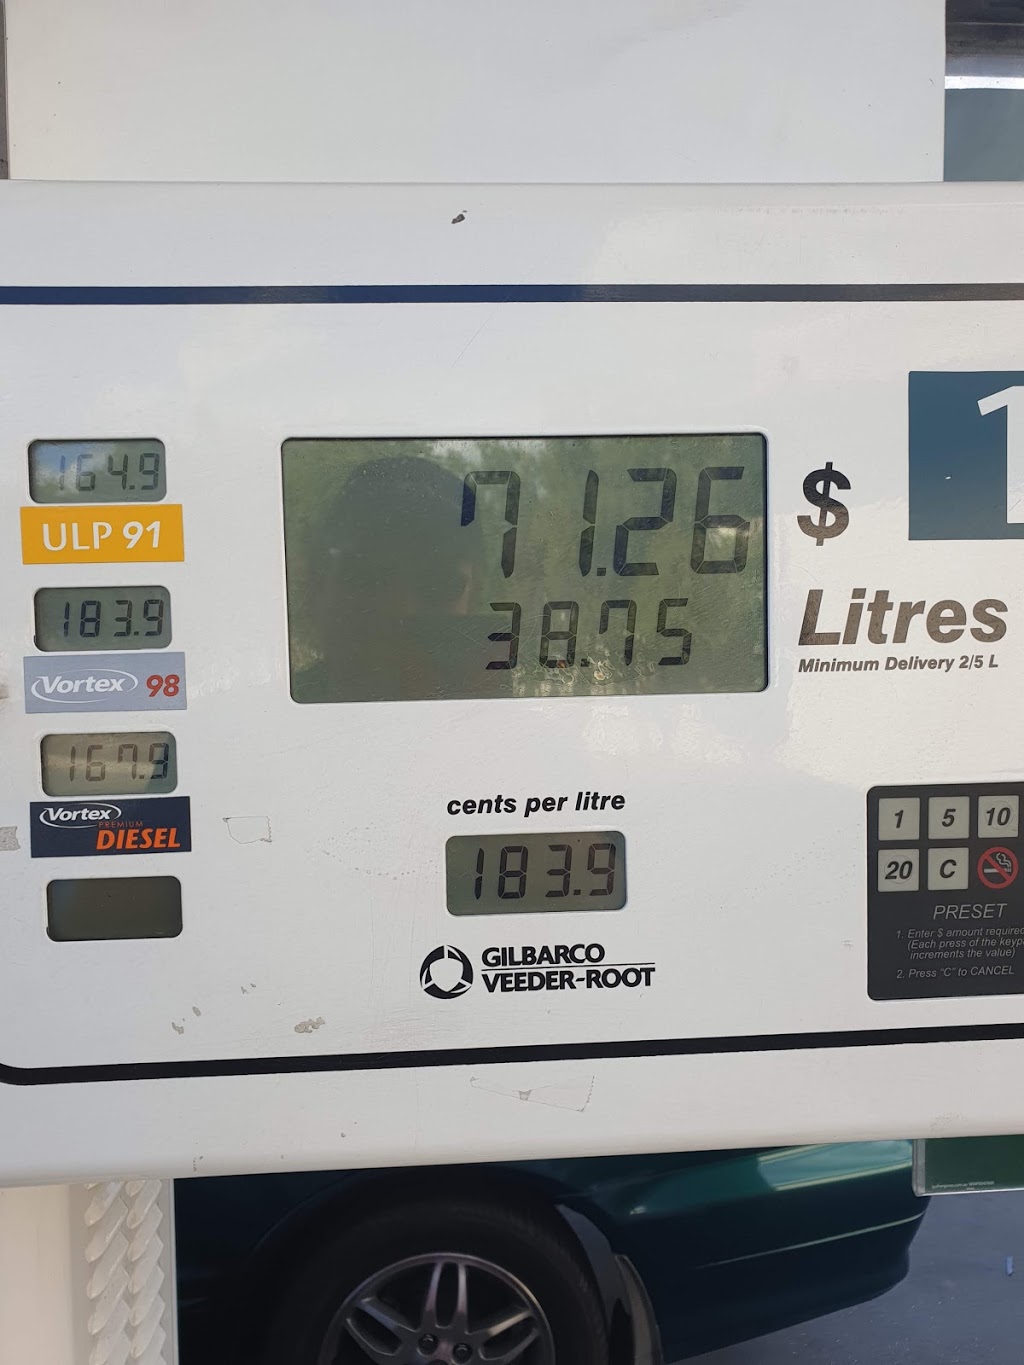 Woolworths Caltex Belconnen | gas station | 4 Luxton St, Belconnen ACT 2617, Australia | 0262532471 OR +61 2 6253 2471